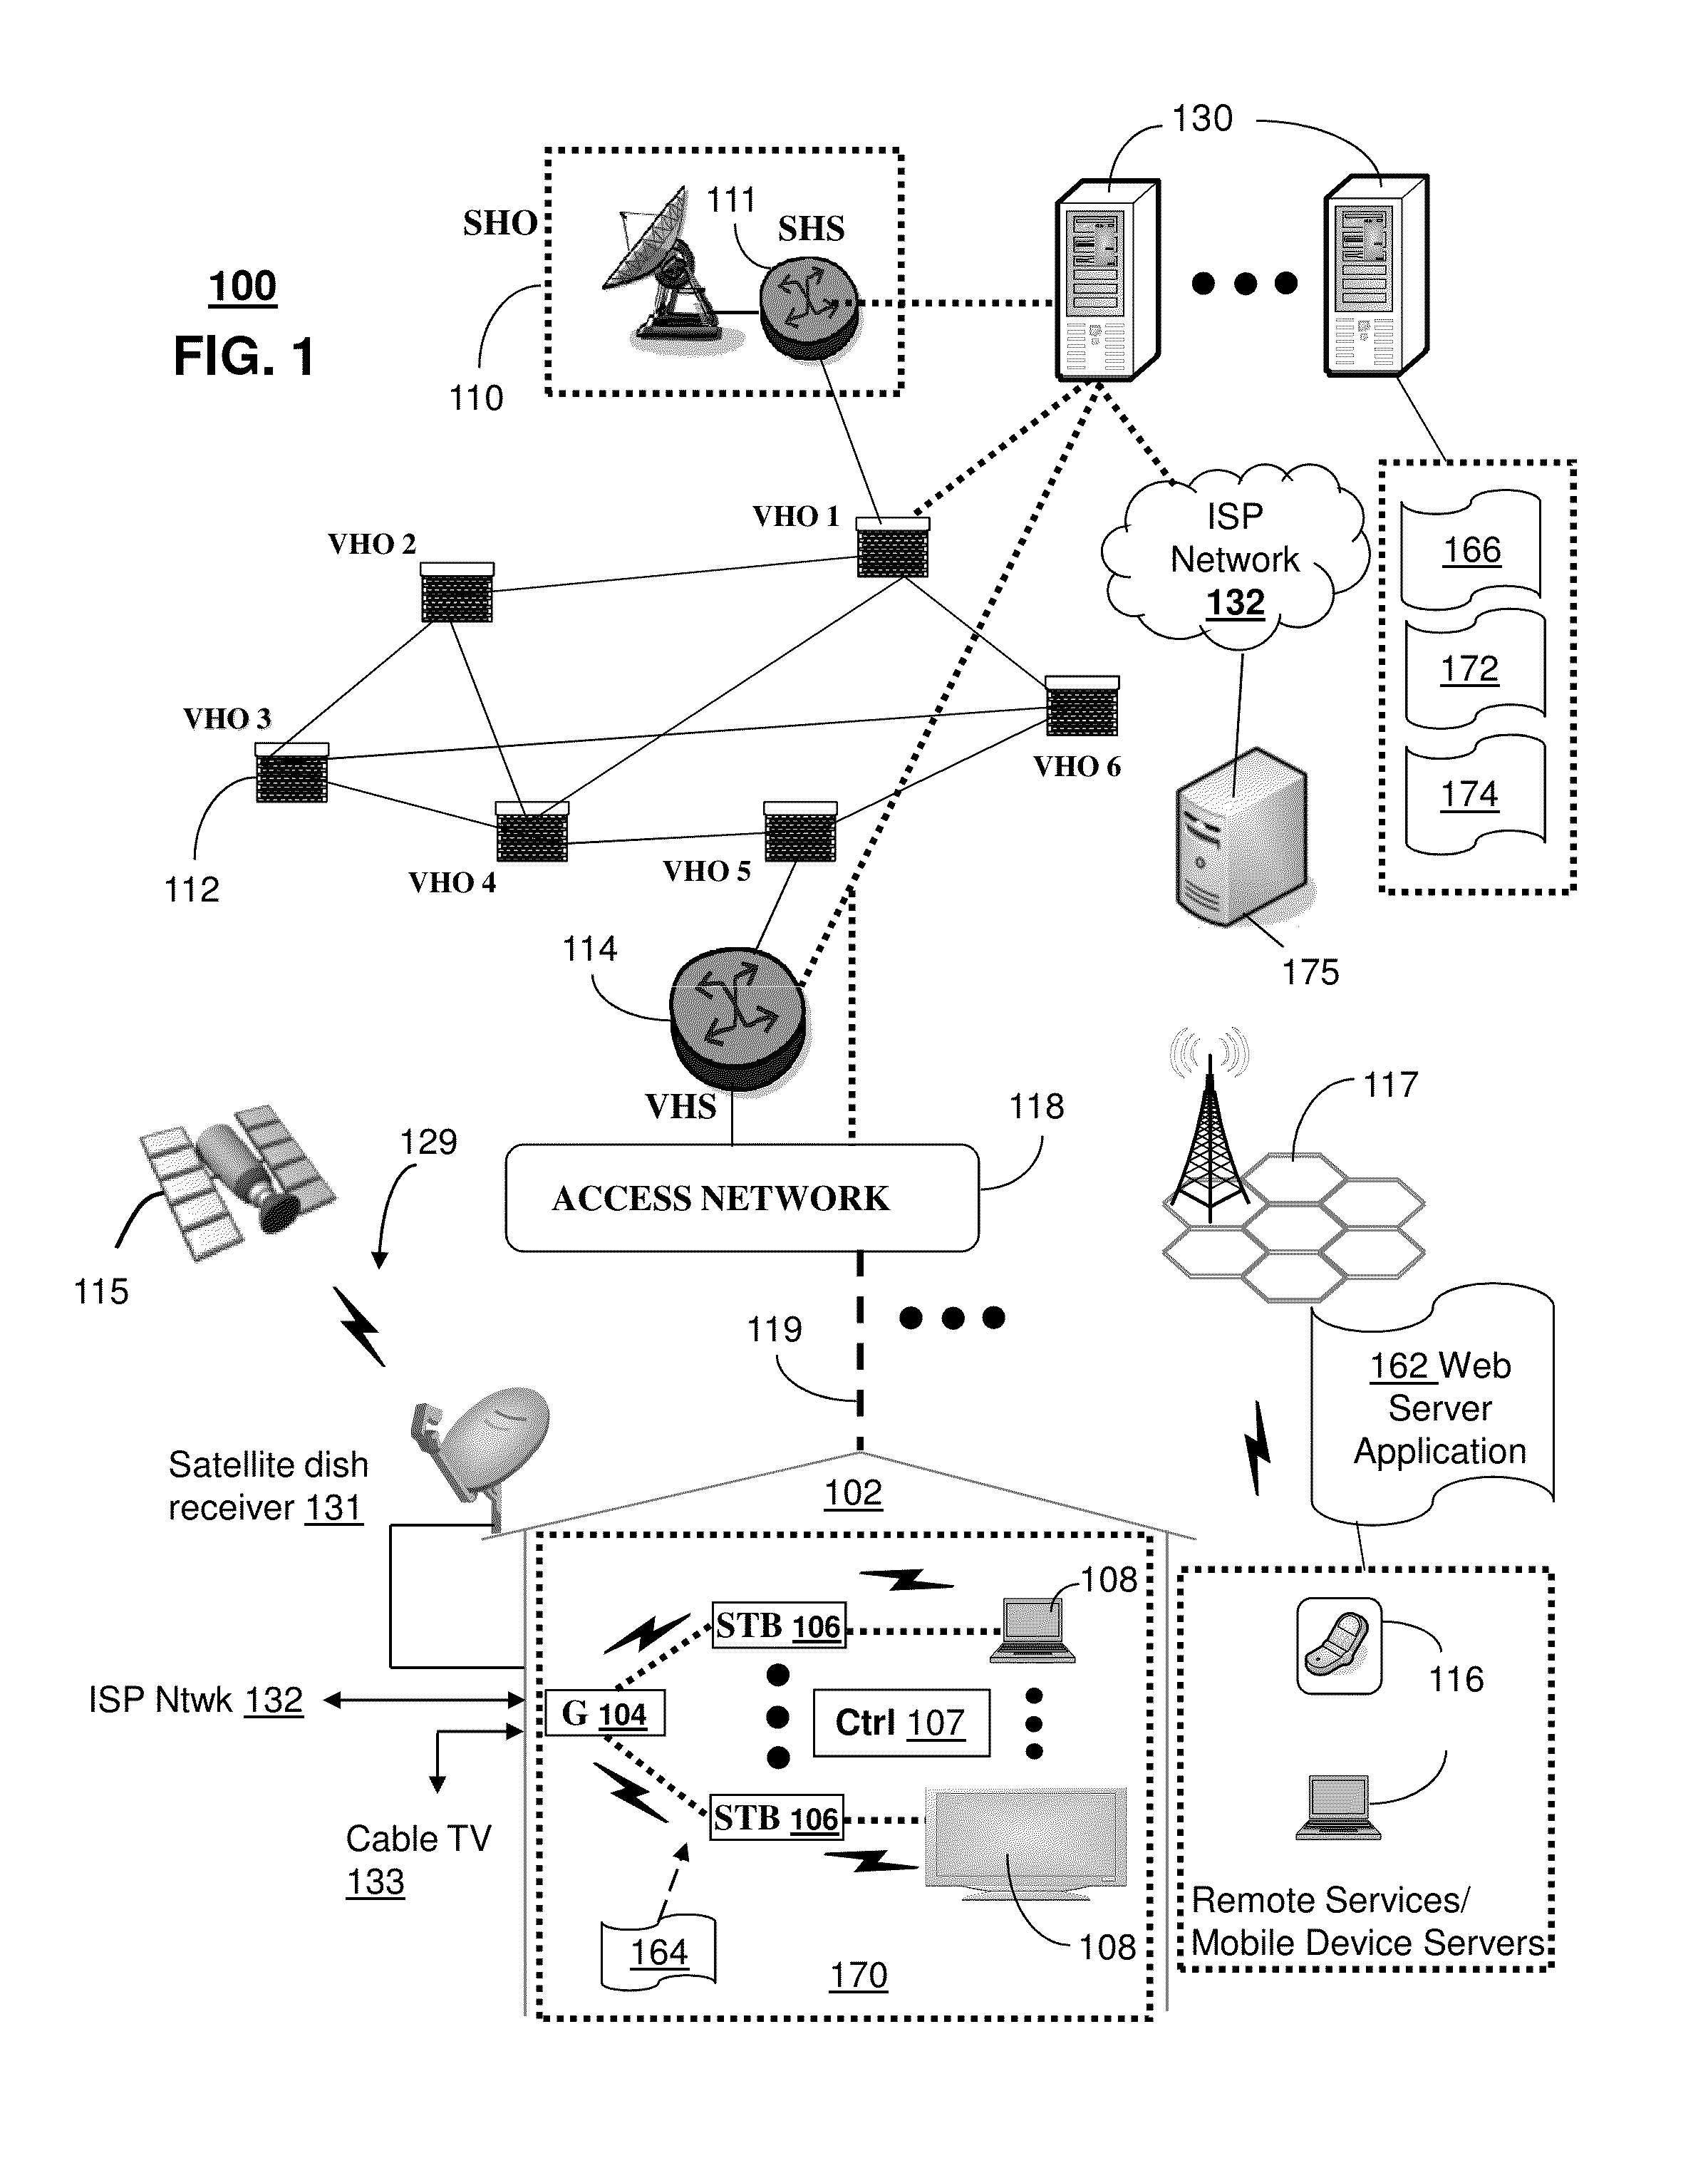 Apparatus and method for managing software applications of a mobile device server